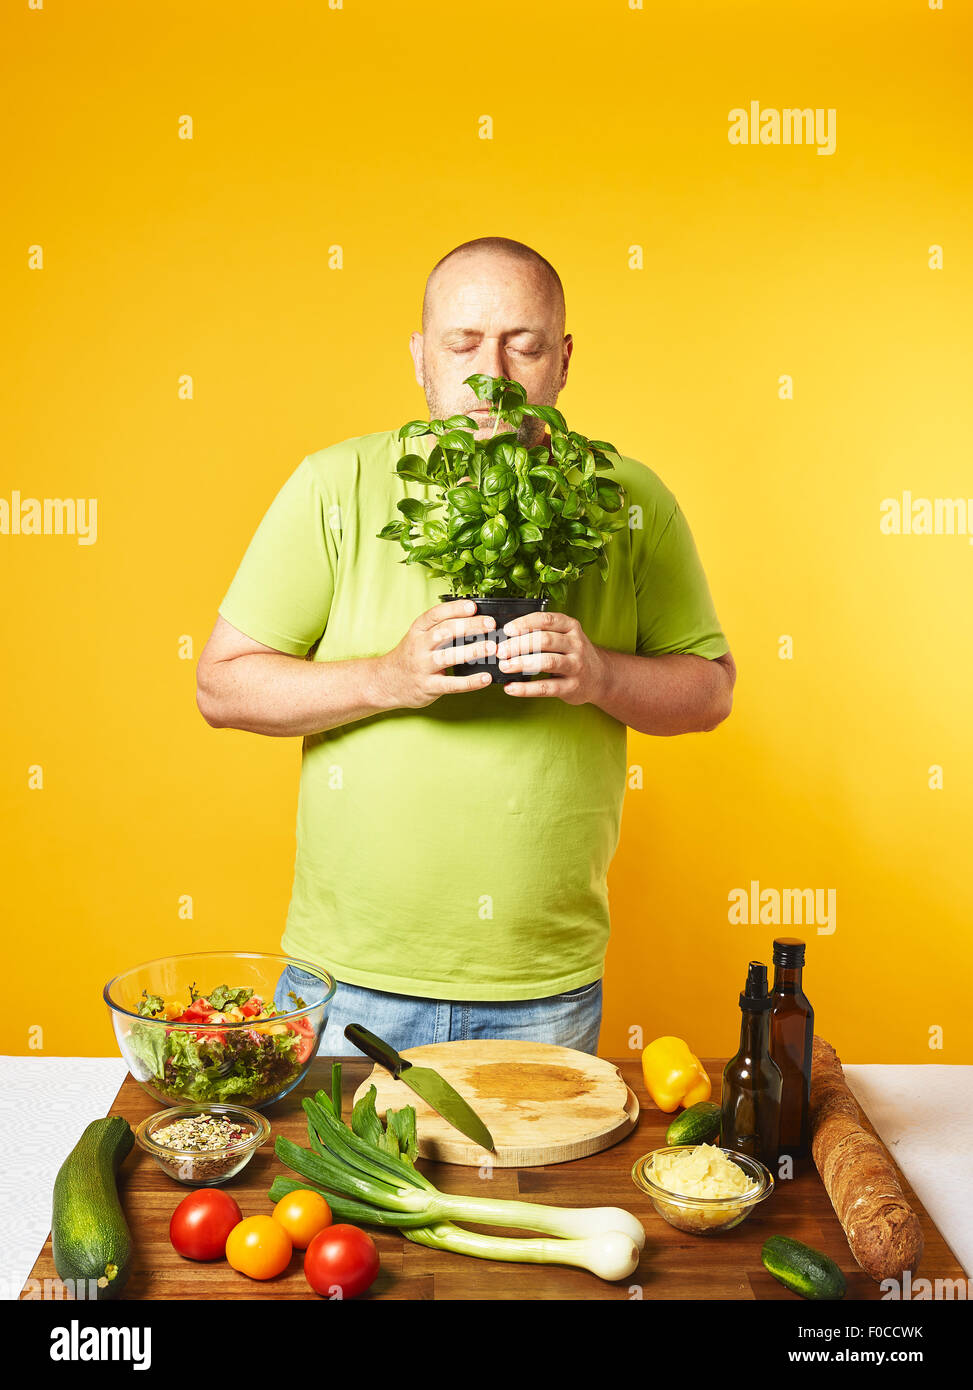 Fresh salad ingredients on the table, middle-aged man sniffs basil leaves  -  copy space and yellow background Stock Photo